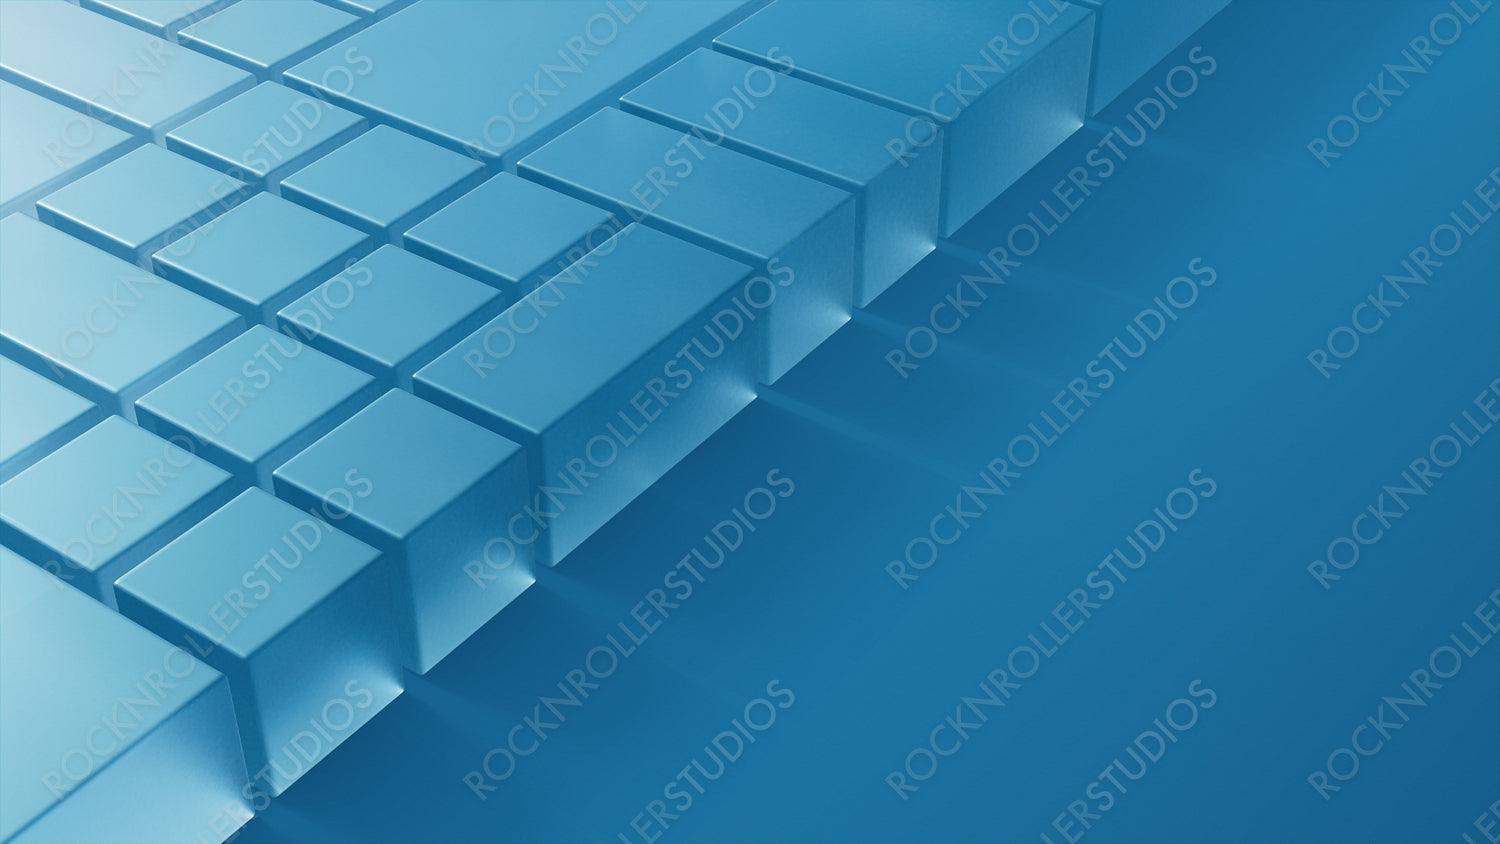 Transparent Blocks on a Blue Surface. Visionary Tech Aesthetic with copy space. 3D Render.